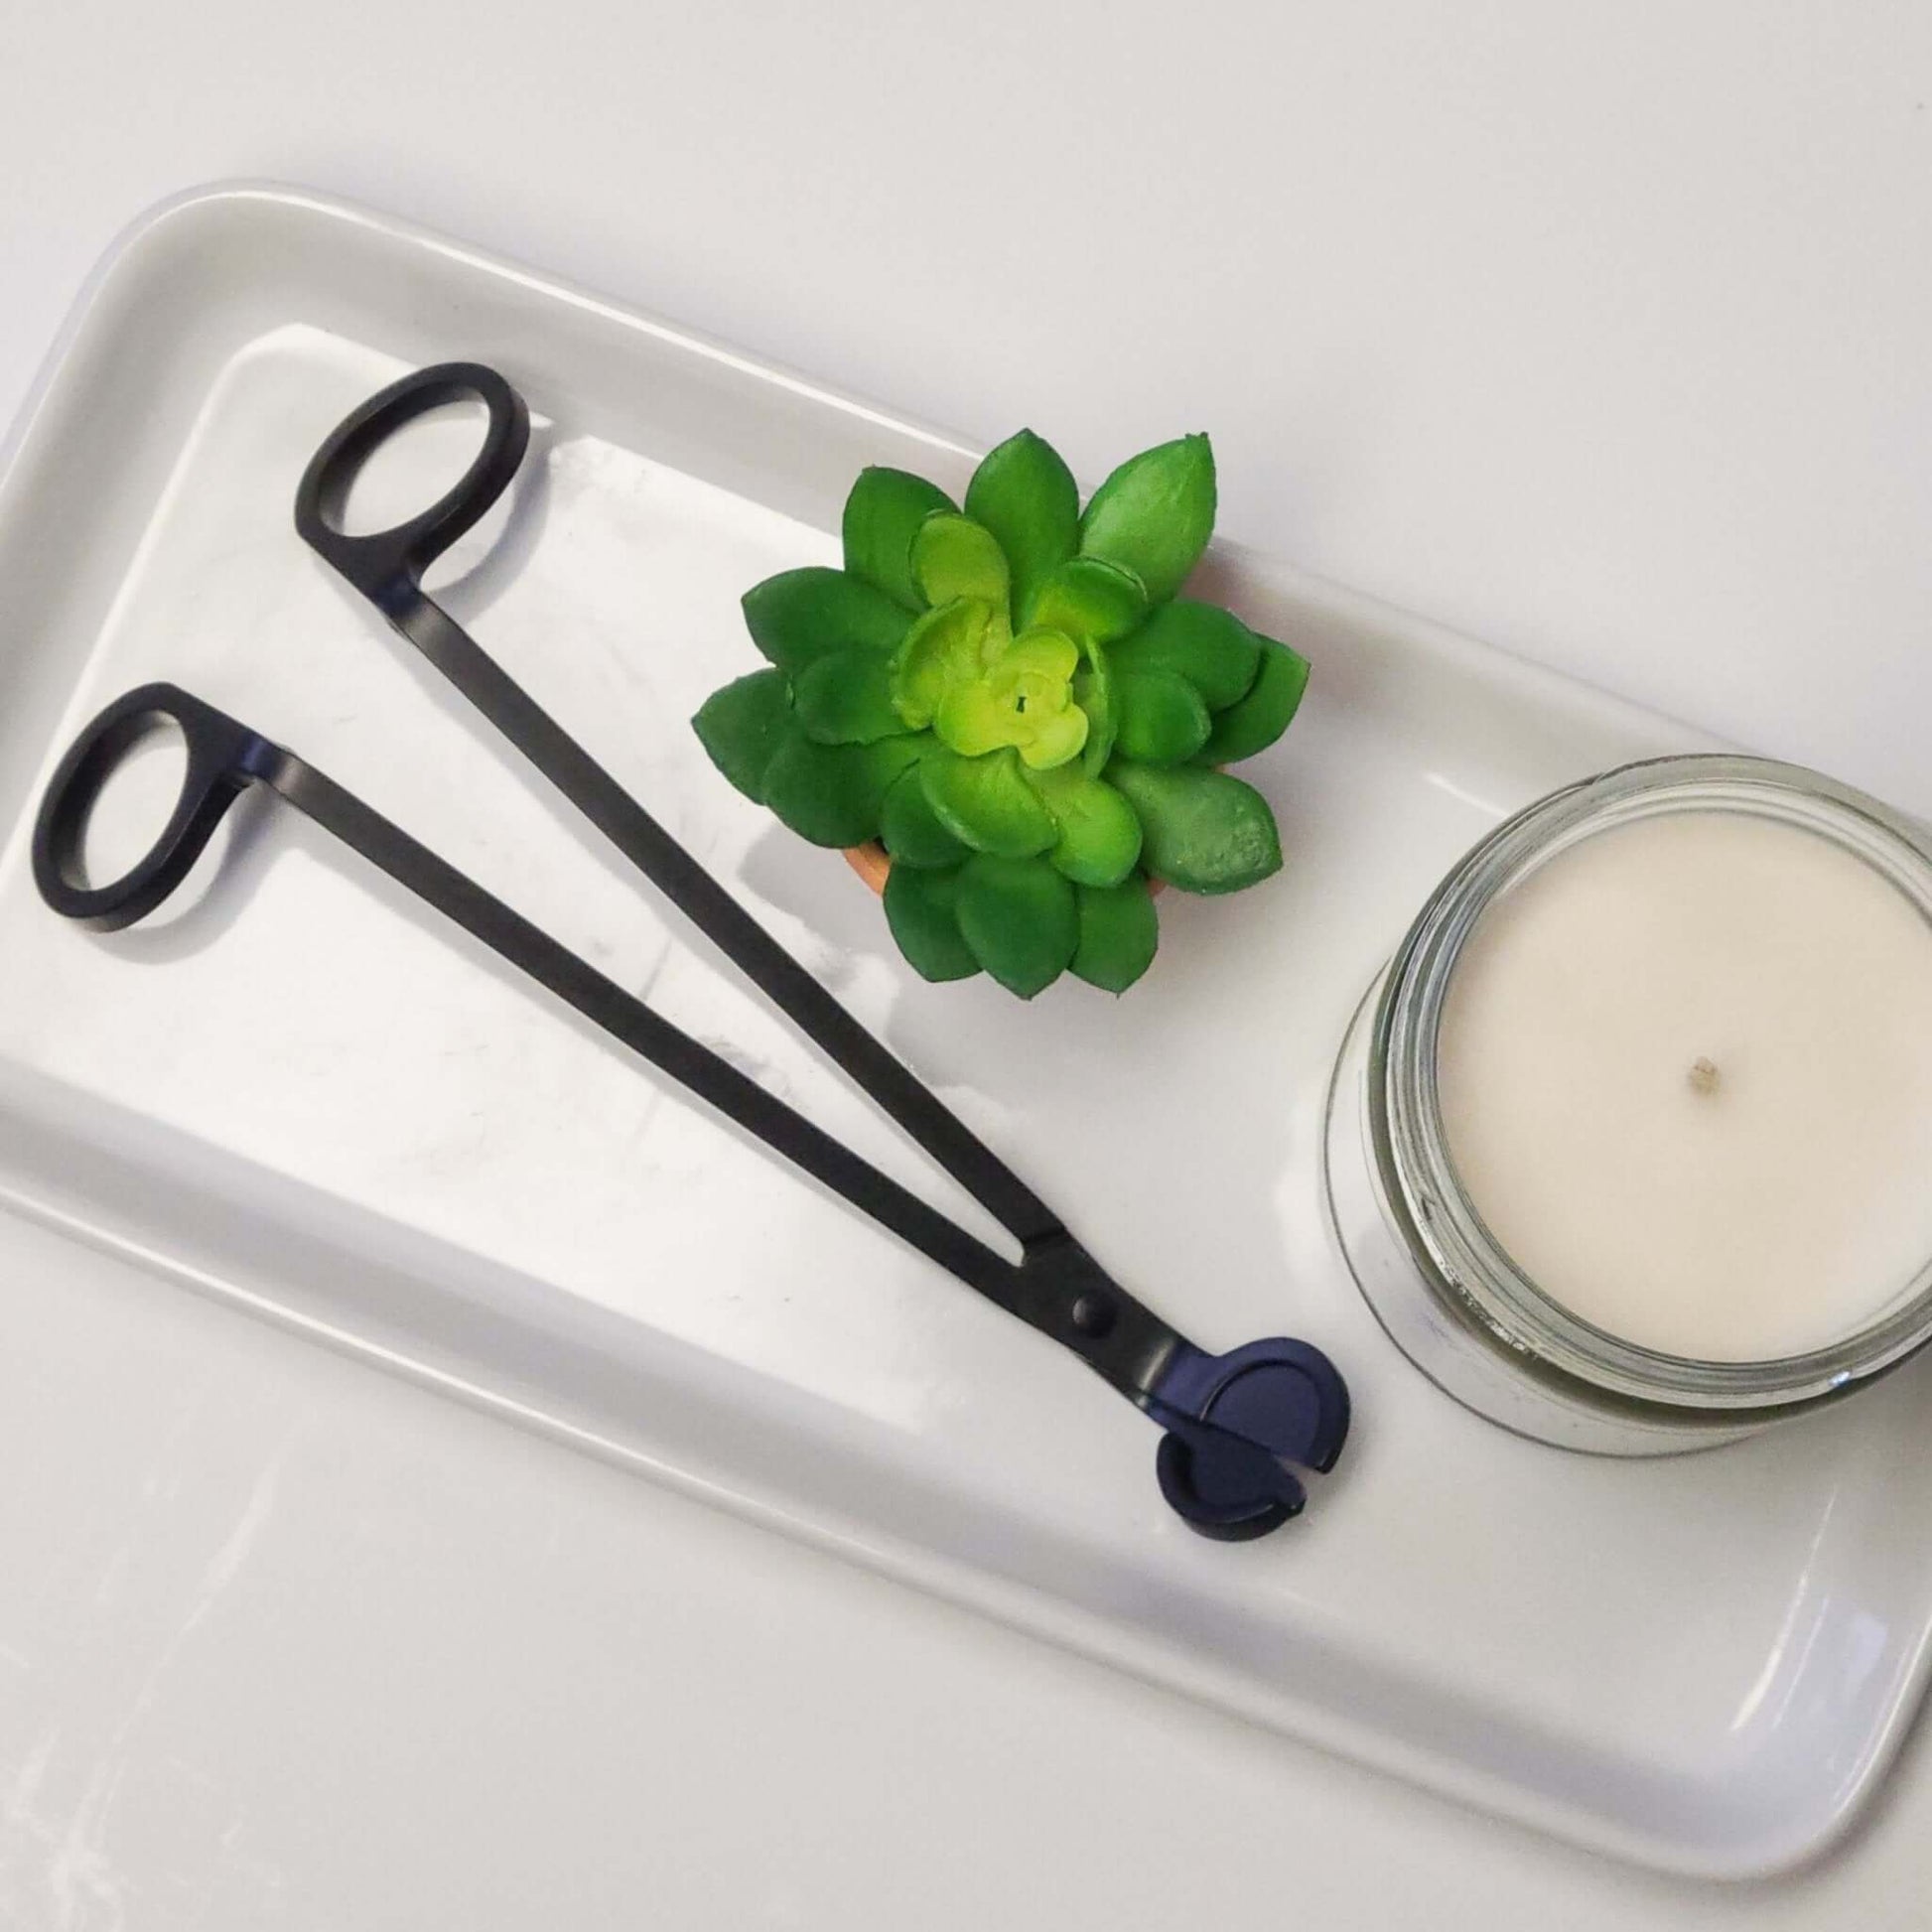 Candle Wick Trimmer, Candle Accessory